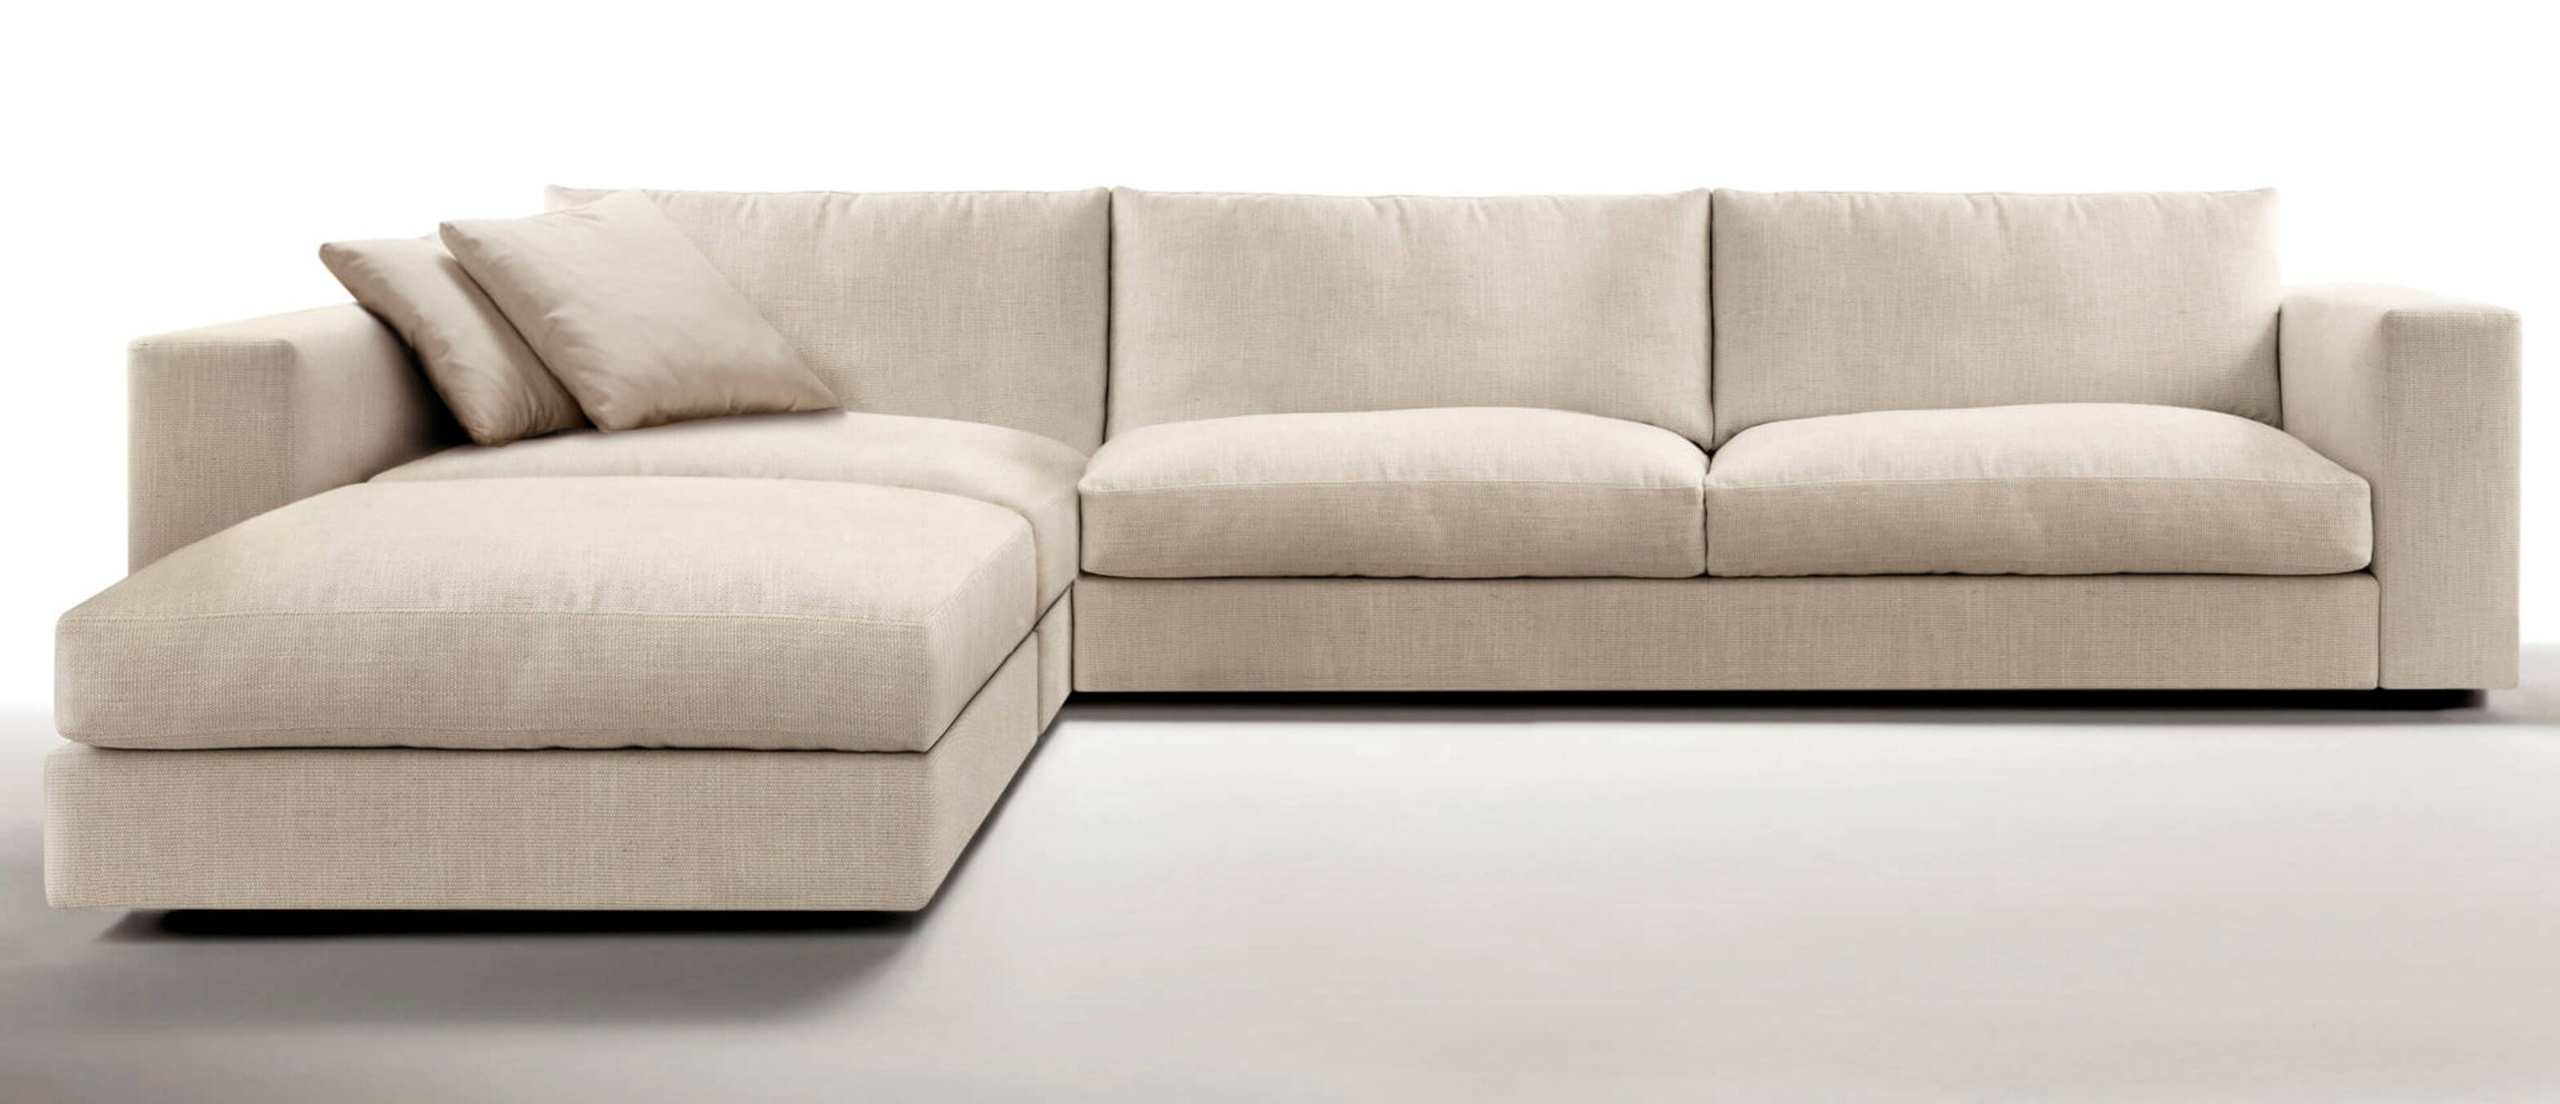 fdw contemporary sectional modern sofa bed